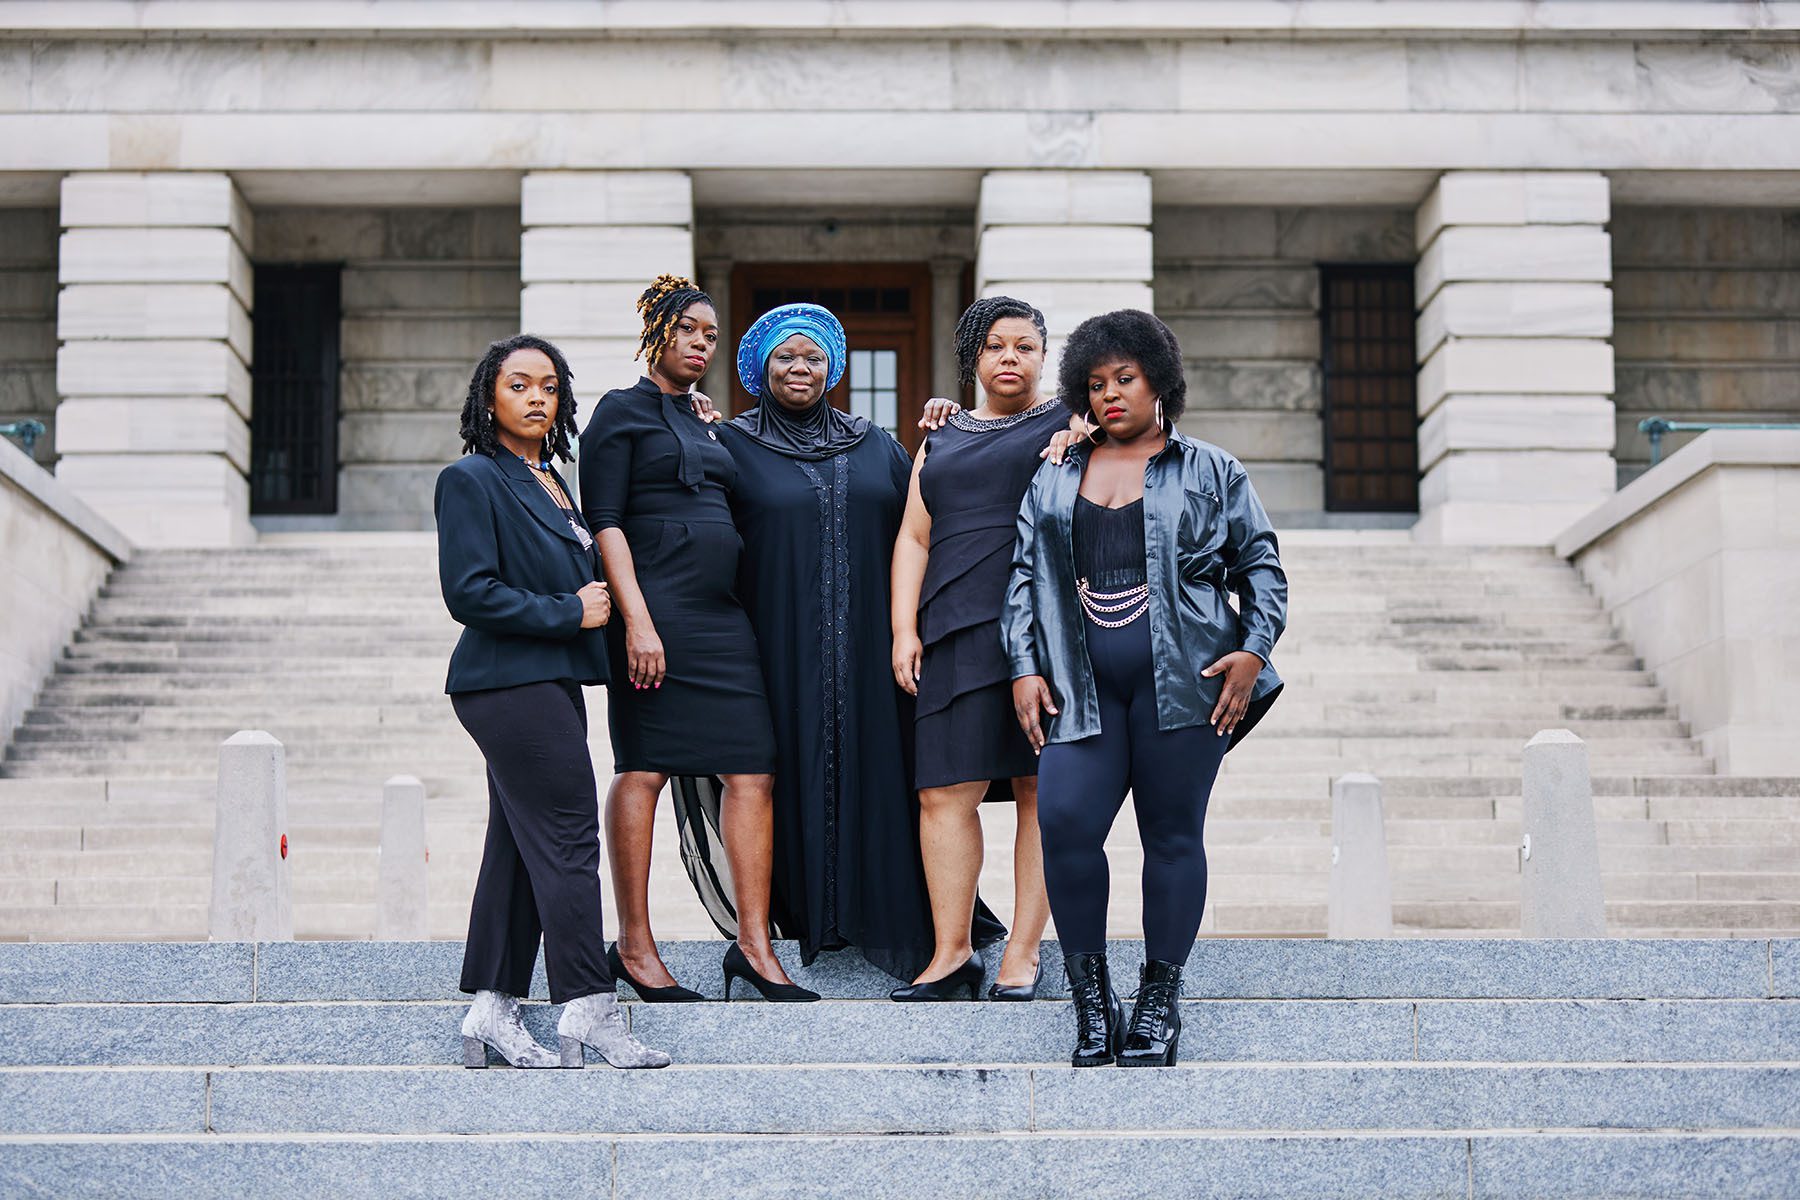 Zulfat Suara, Charlane Oliver, Delishia Porterfield, and Tequila Johnson are joined by Vanderbilt student and activist Kayla Prowell as they pose for a portrait on the steps of the Tennessee State Capitol.